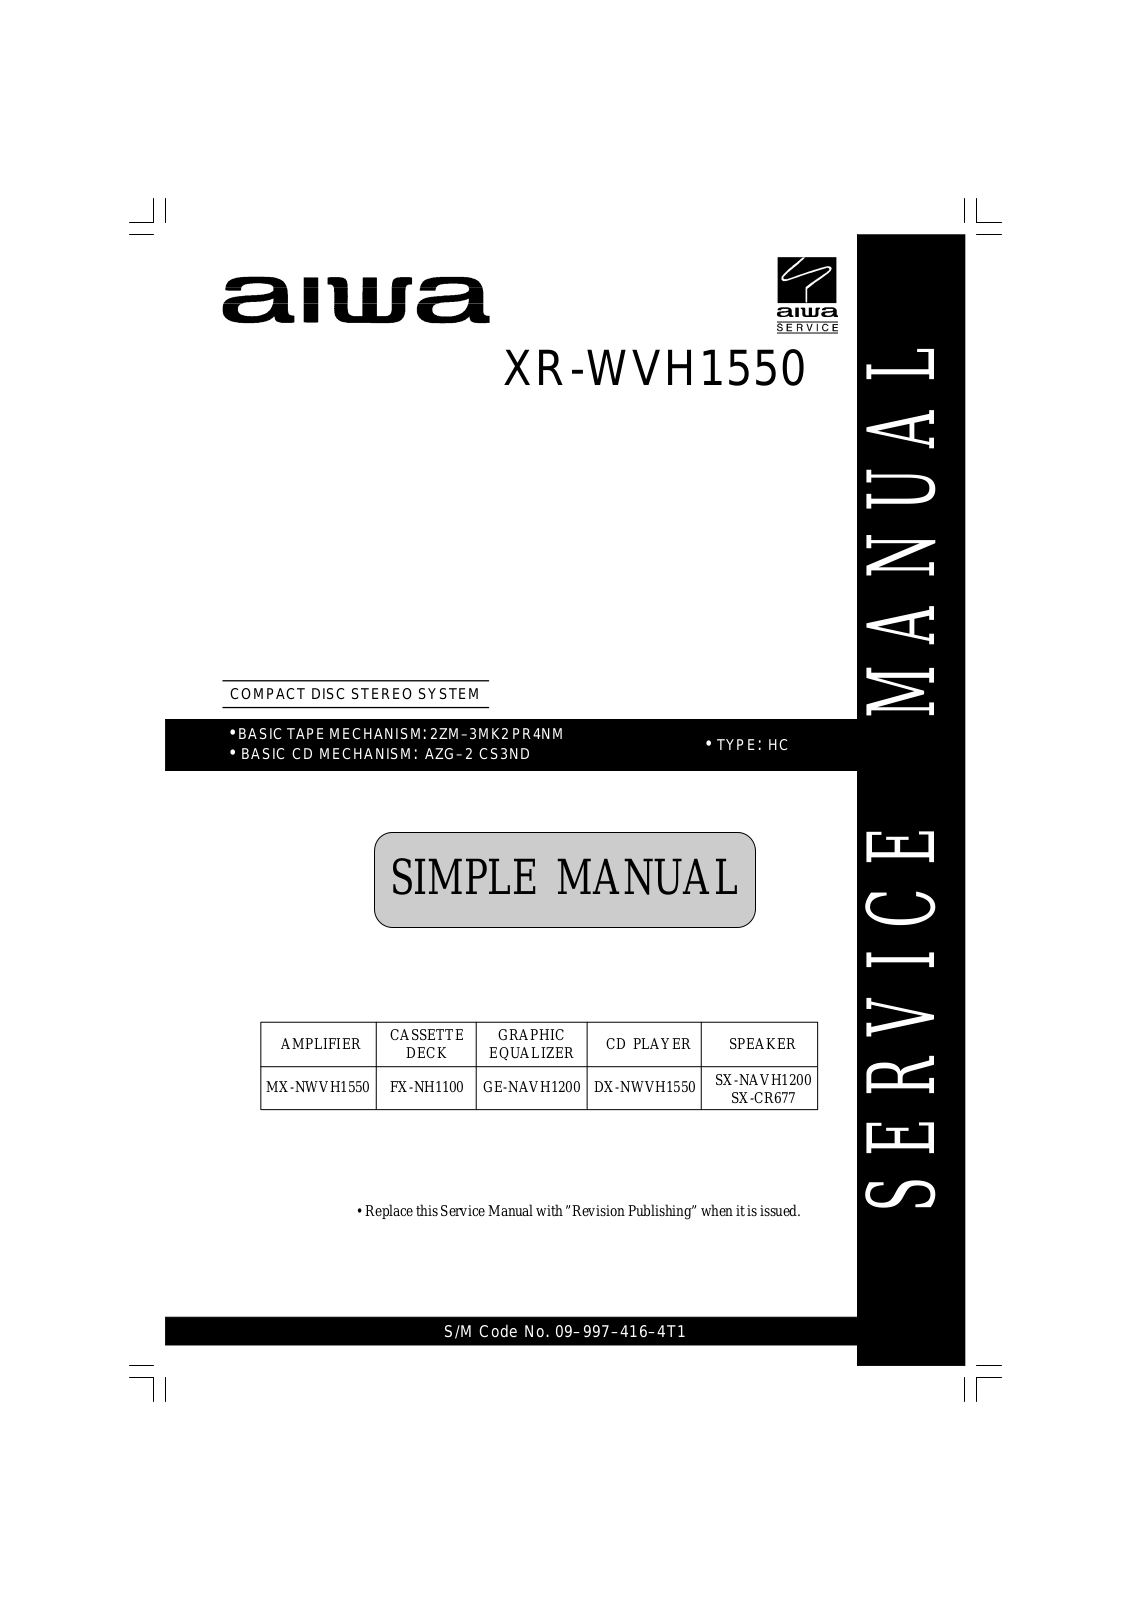 Sony XR WVH1550 Service Manual